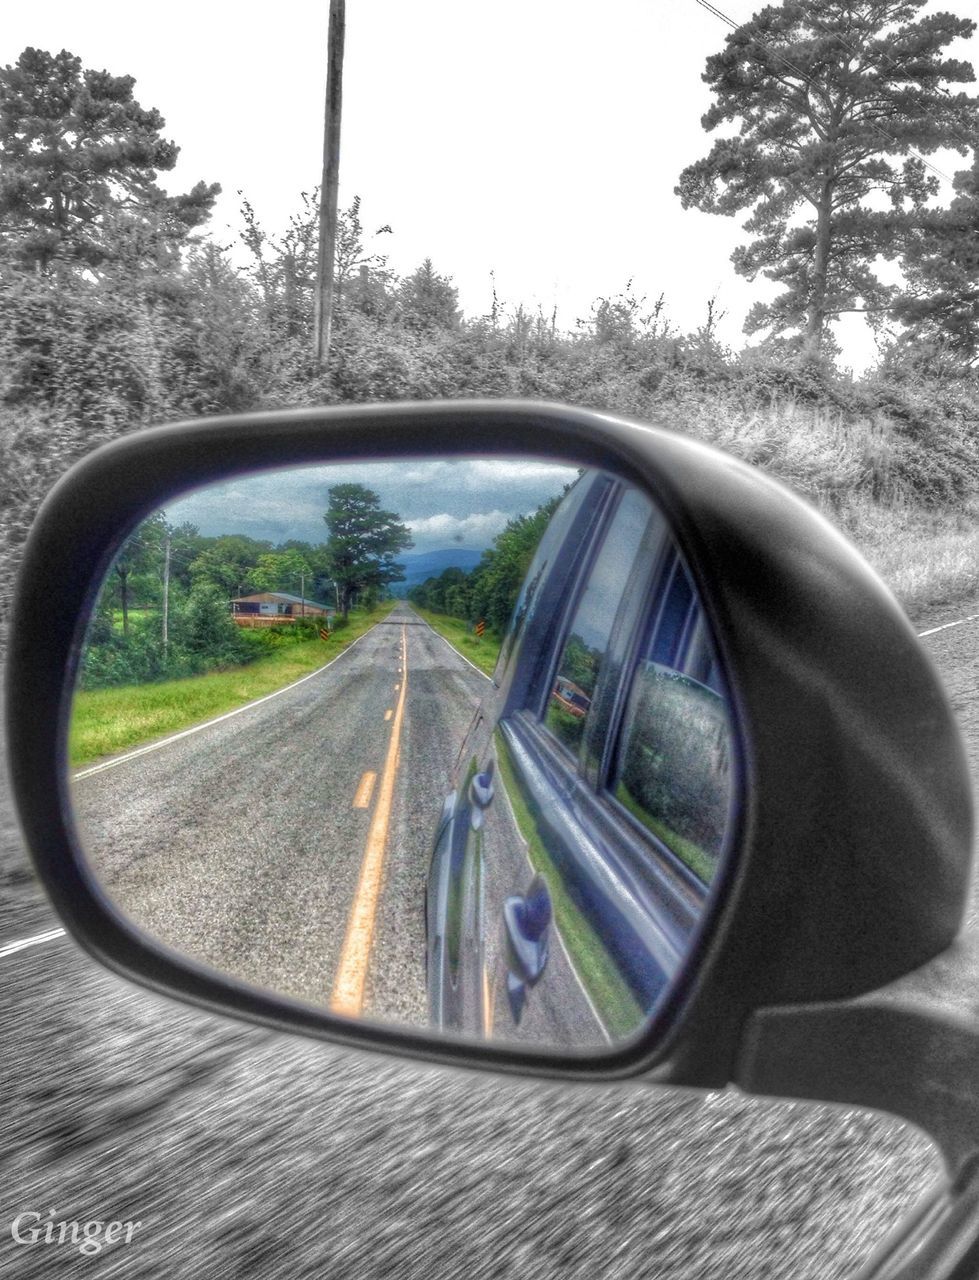 transportation, tree, side-view mirror, land vehicle, mode of transport, reflection, car, road, transparent, glass - material, part of, vehicle interior, close-up, day, travel, sky, railroad track, car interior, cropped, no people